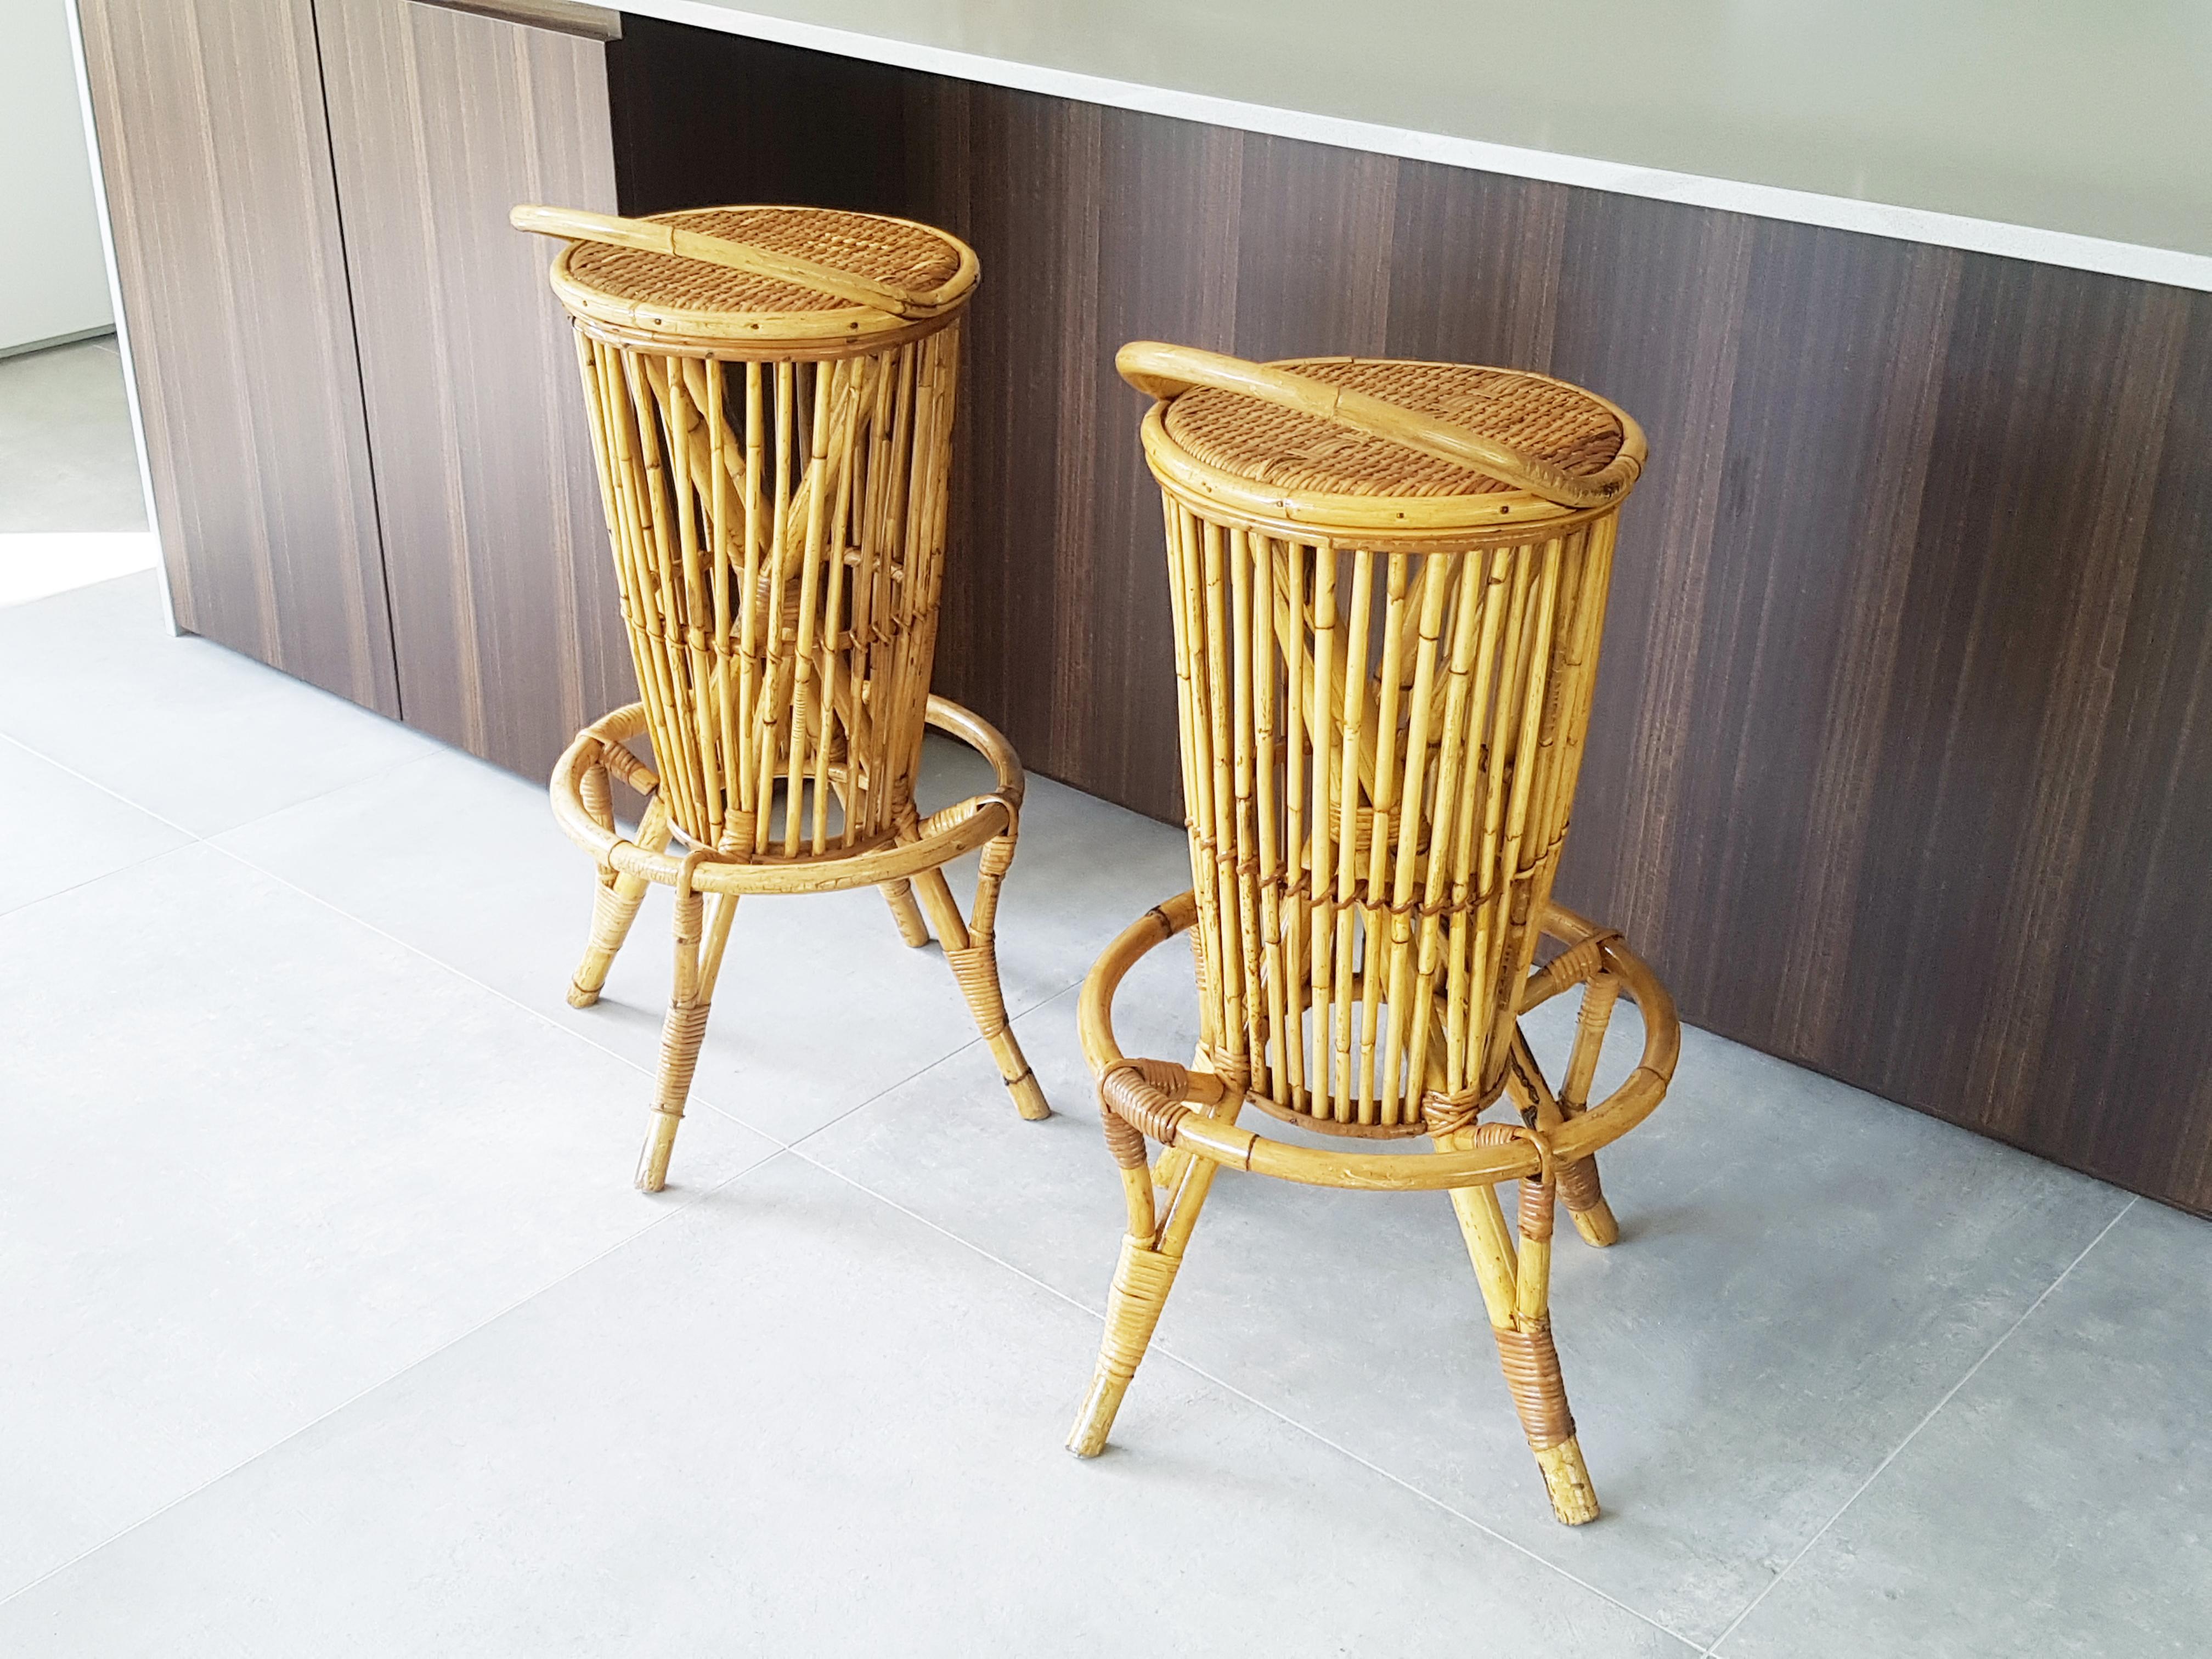 Pair of beautiful rattan bar stools produced in Italy in the 1960s. Very good condition, one low backrest has been repaired.